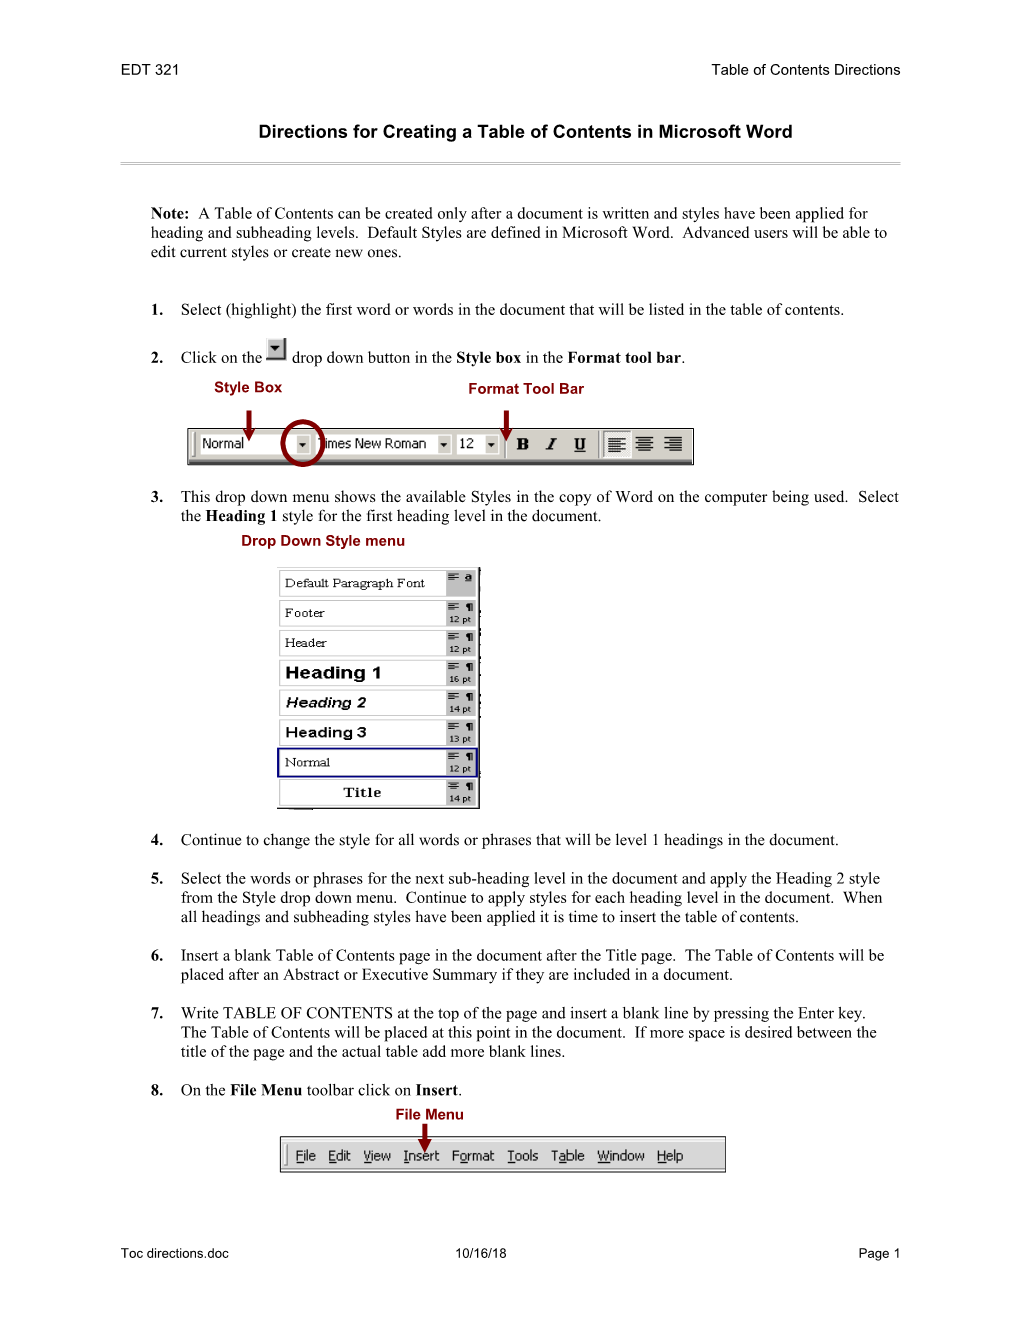 Directions for Creating Table of Contents in Microsoft Word